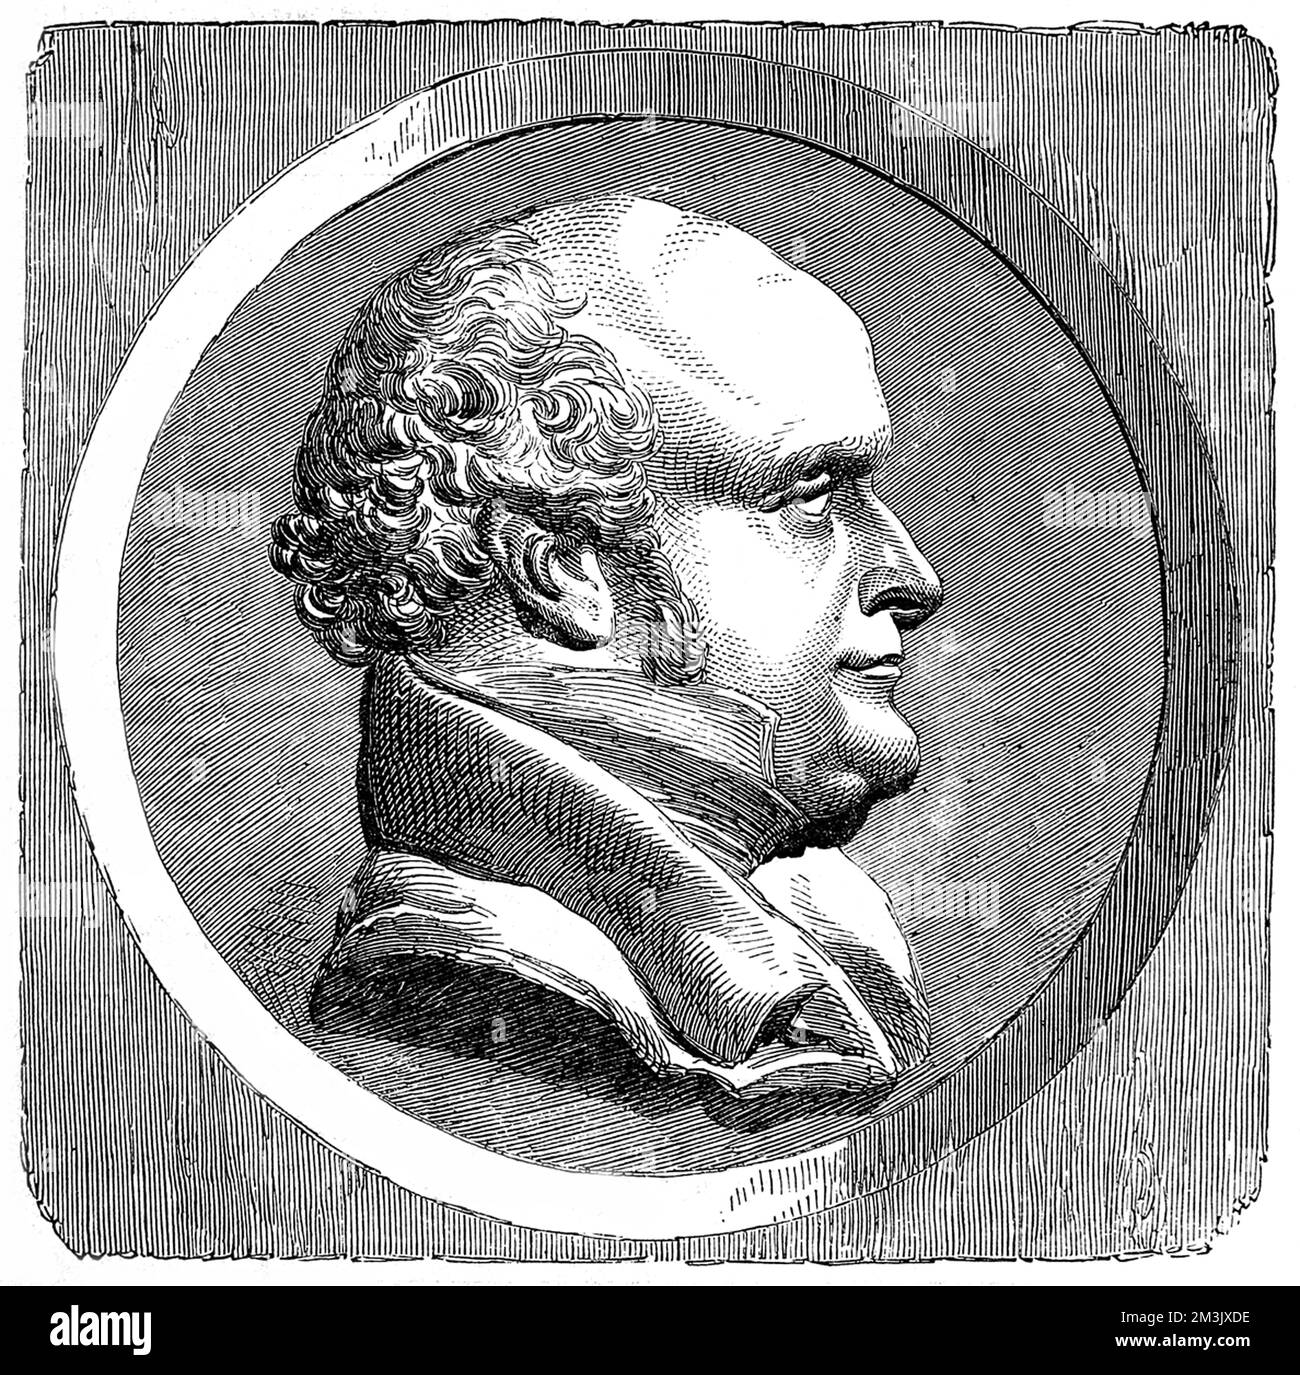 Sir John Franklin (1786 - 1847), English naval commander and explorer, who led the ill-fated Arctic expedition of 1845. The metallic portrait was made by M. David.  In 1845 the British Admiralty sent two polar exploration ships, HMS 'Erebus' and HMS 'Terror', to look for the Northwest passage round the northern coast of Canada. The expedition, commanded by Sir John Franklin, disappeared from view late in 1845 and none of the men were ever seen again.   In fact the ships made it to the King William Island region, then got stuck in the ice. With supplies running out the surviving crew abando Stock Photo